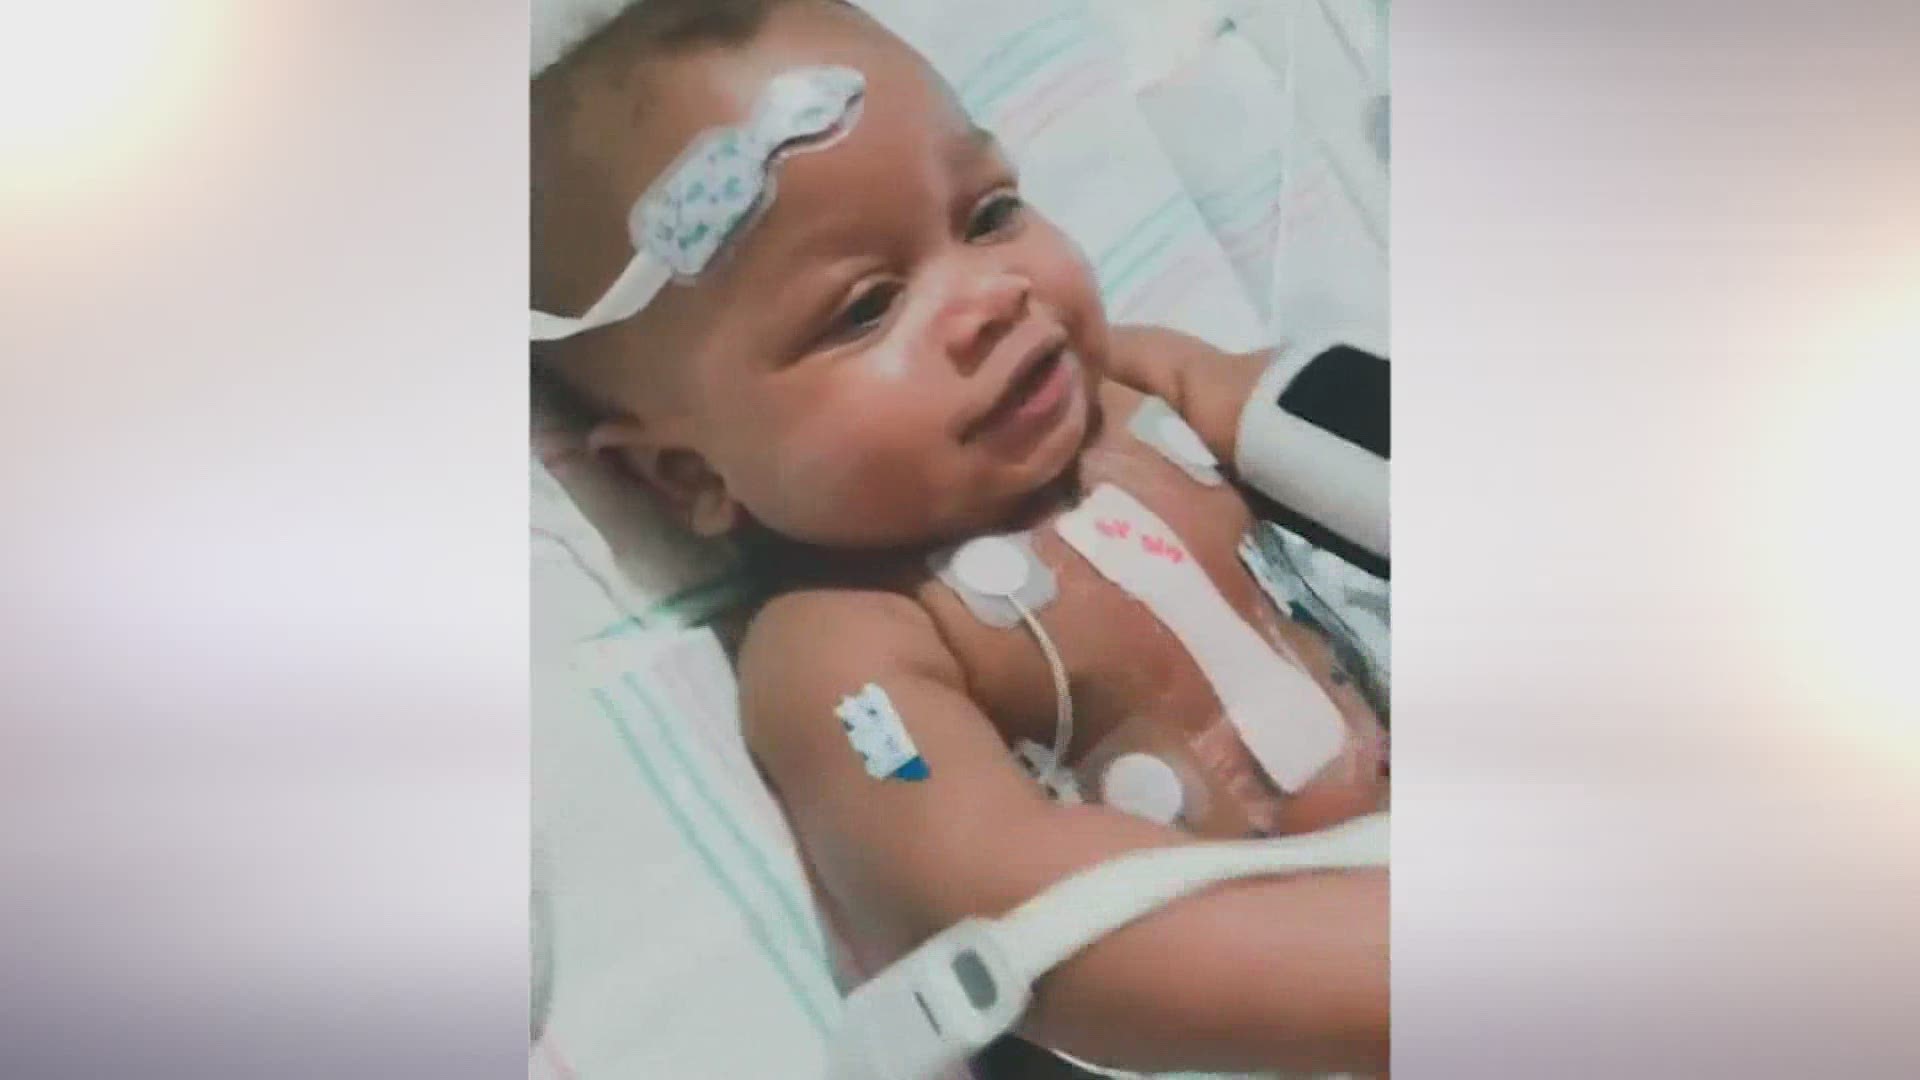 A Mississippi mother's decision to act on instinct and come to Houston may have saved the life of her newborn child.